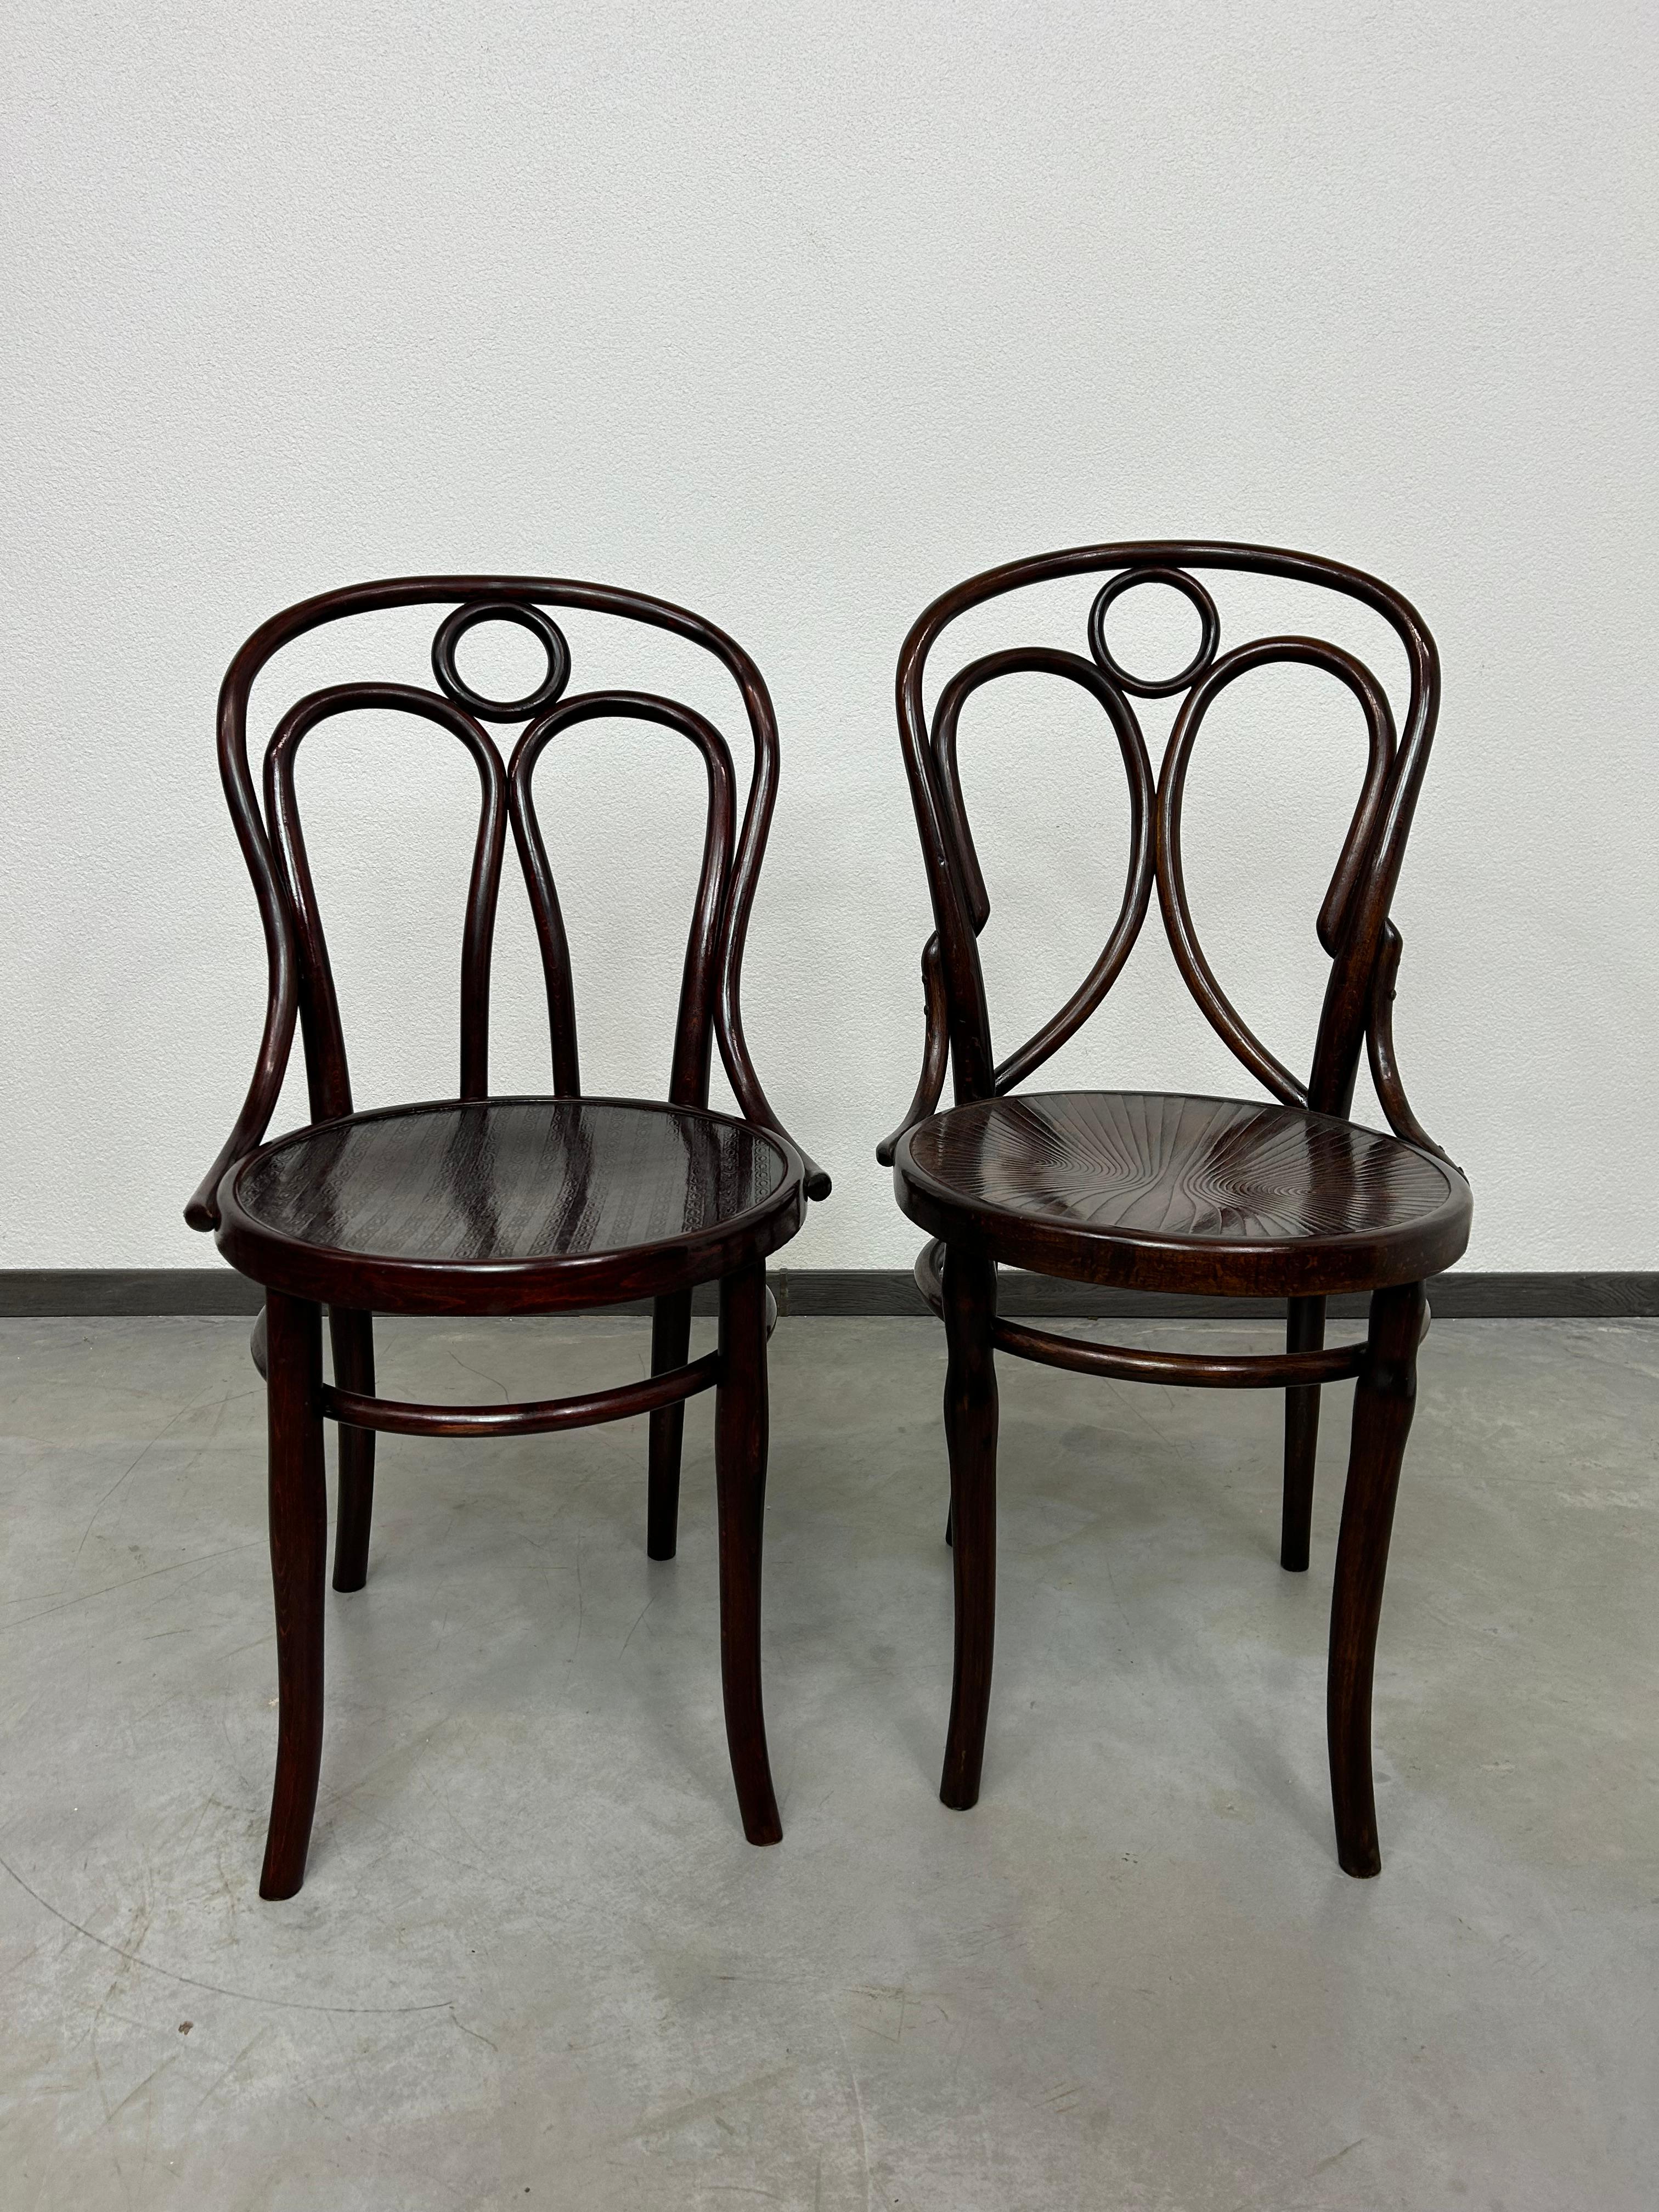 Secession dining chairs Thonet no.19 and Kohn no.36 professionally stained and repolished.